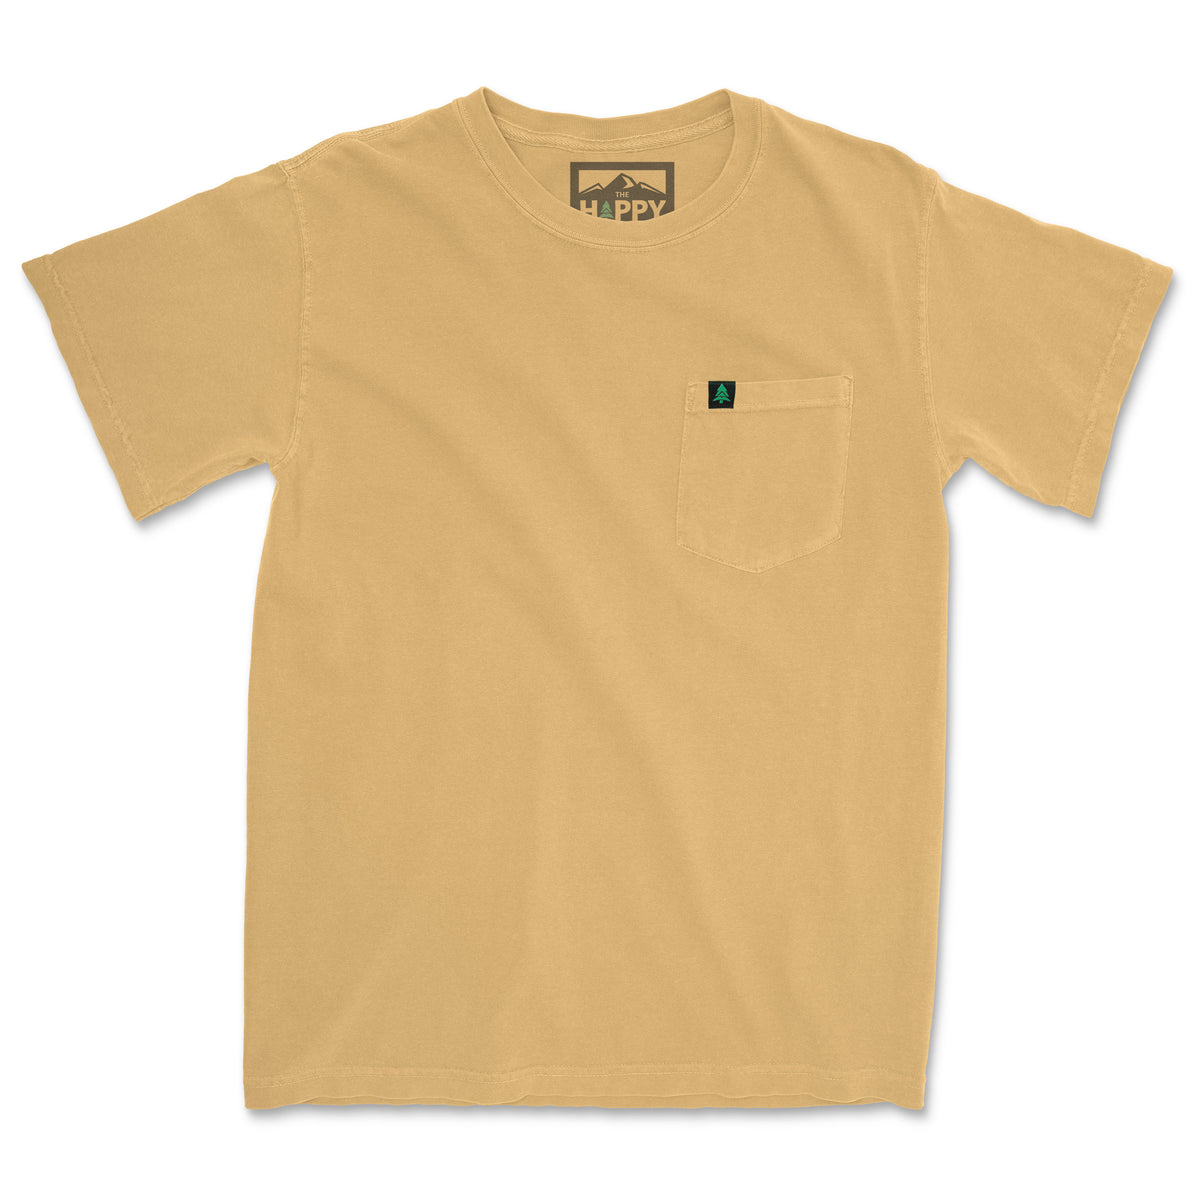 Branded Unisex Pigment Dyed Pocket T-Shirt - The Happy Clothing Company